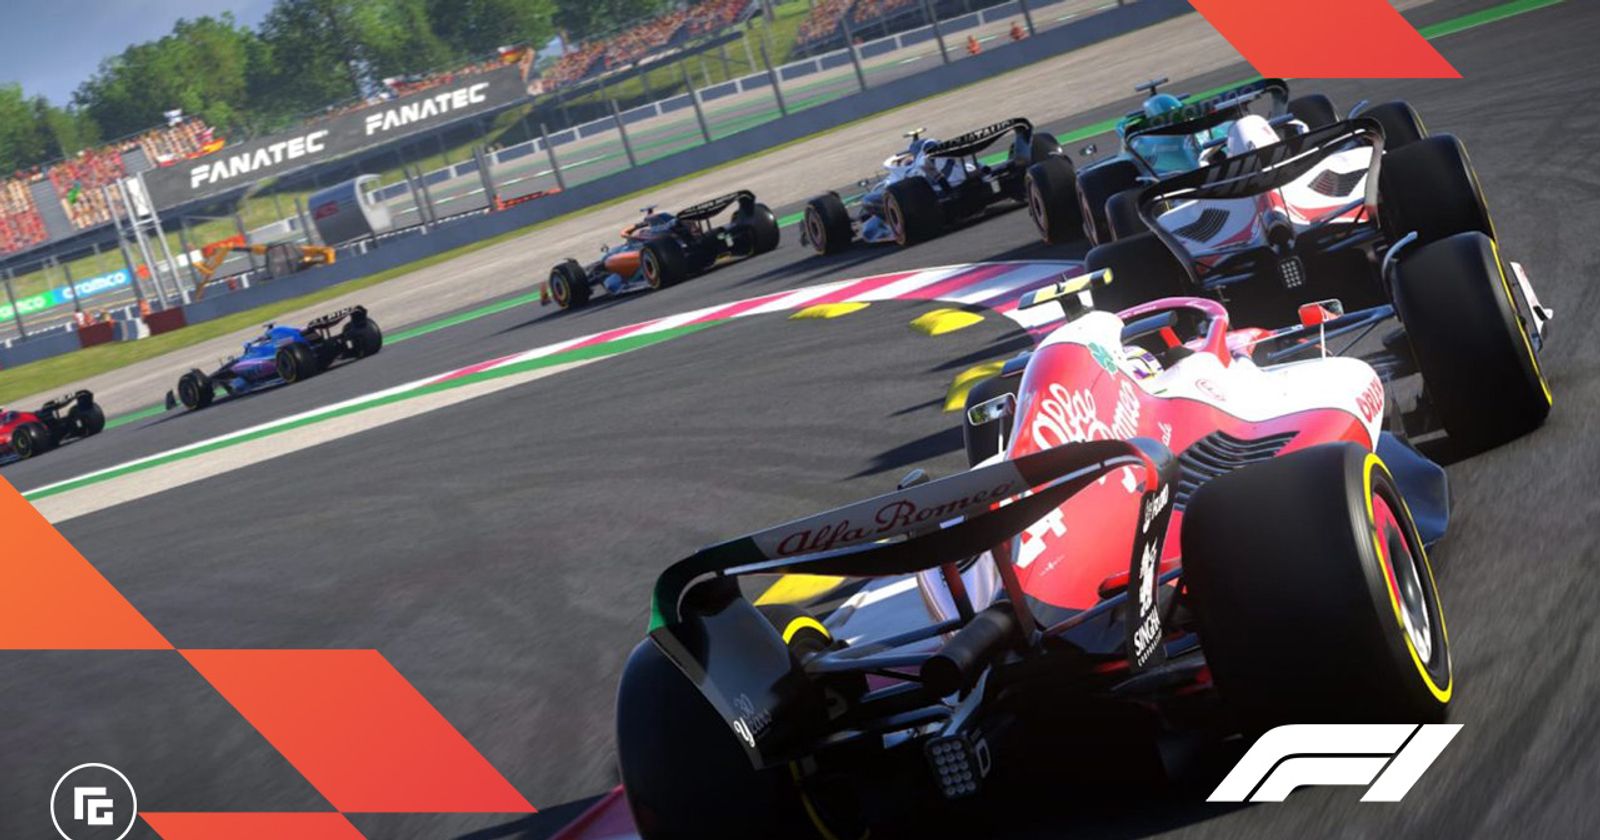 I didn't see it mentioned here, but F1 22 Champions Edition will